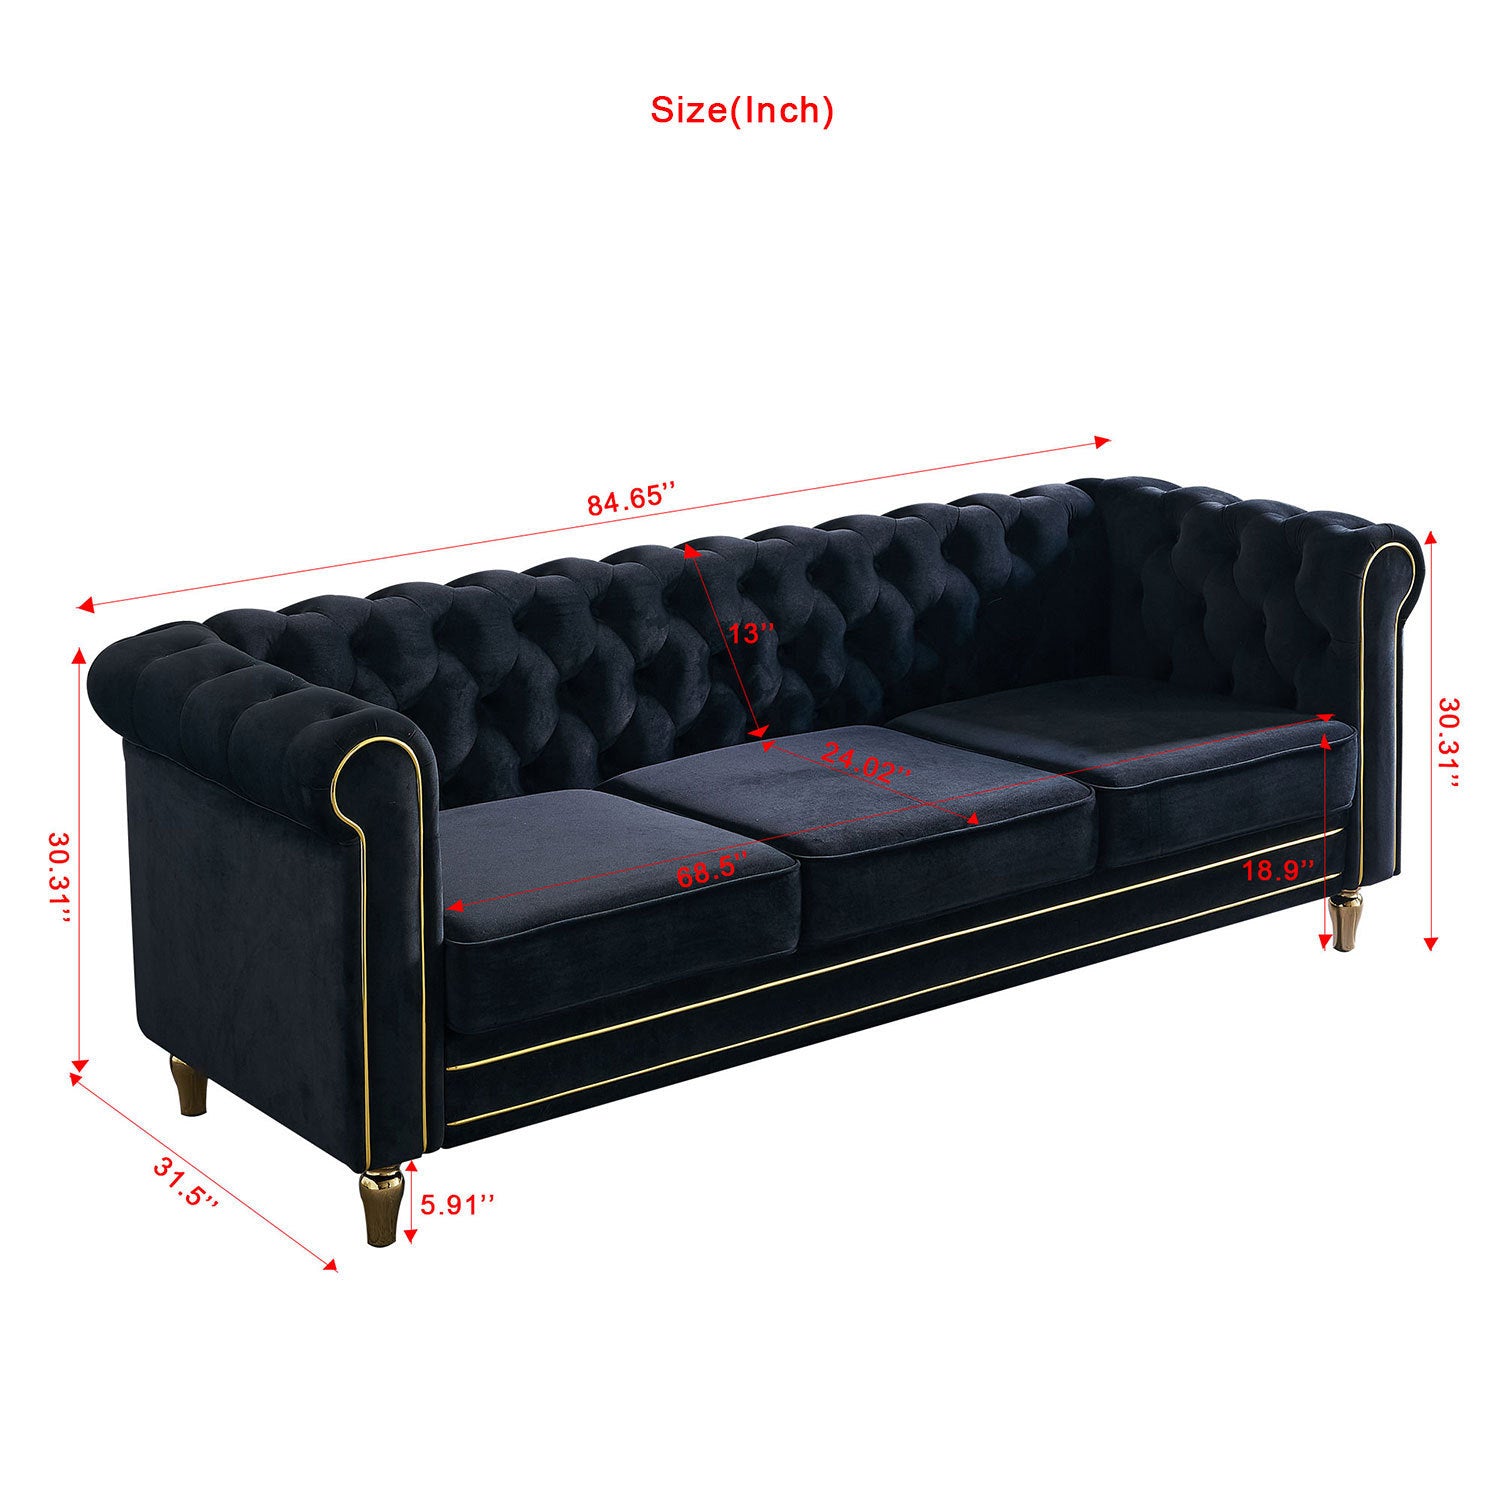 84" Black Velvet Chesterfield Sofa With Gold Trim and Metal legs